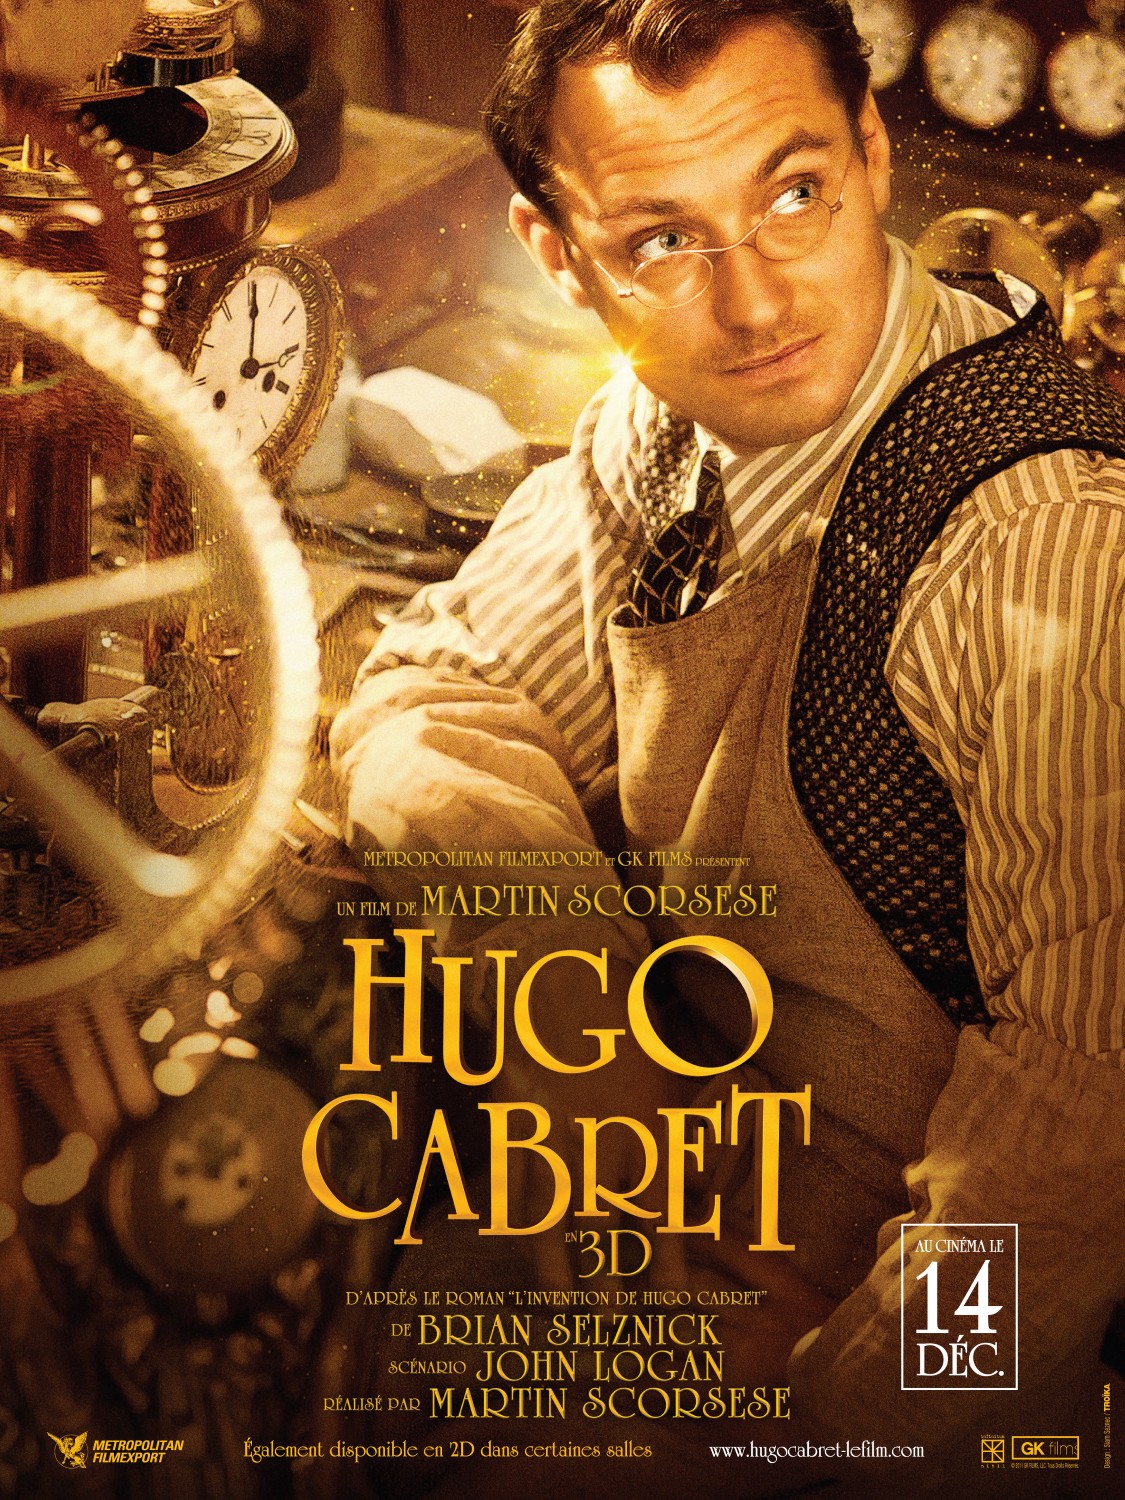 Watch: Four Minutes From Martin Scorsese's 'Hugo'; Five Posters and Q&A